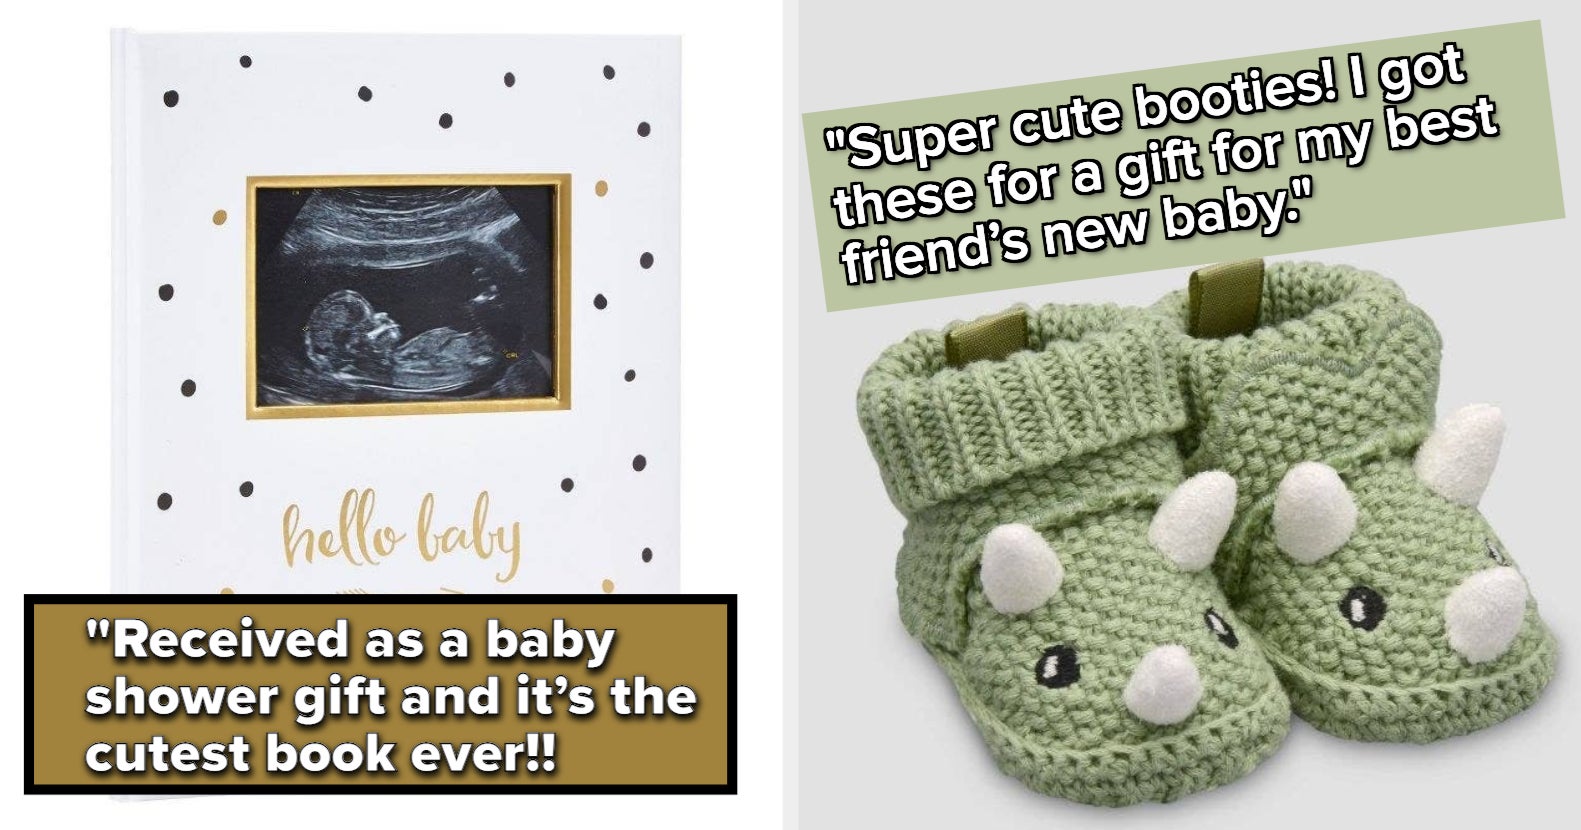 A Pediatrician's New Baby Kit: Great Baby Shower Gift